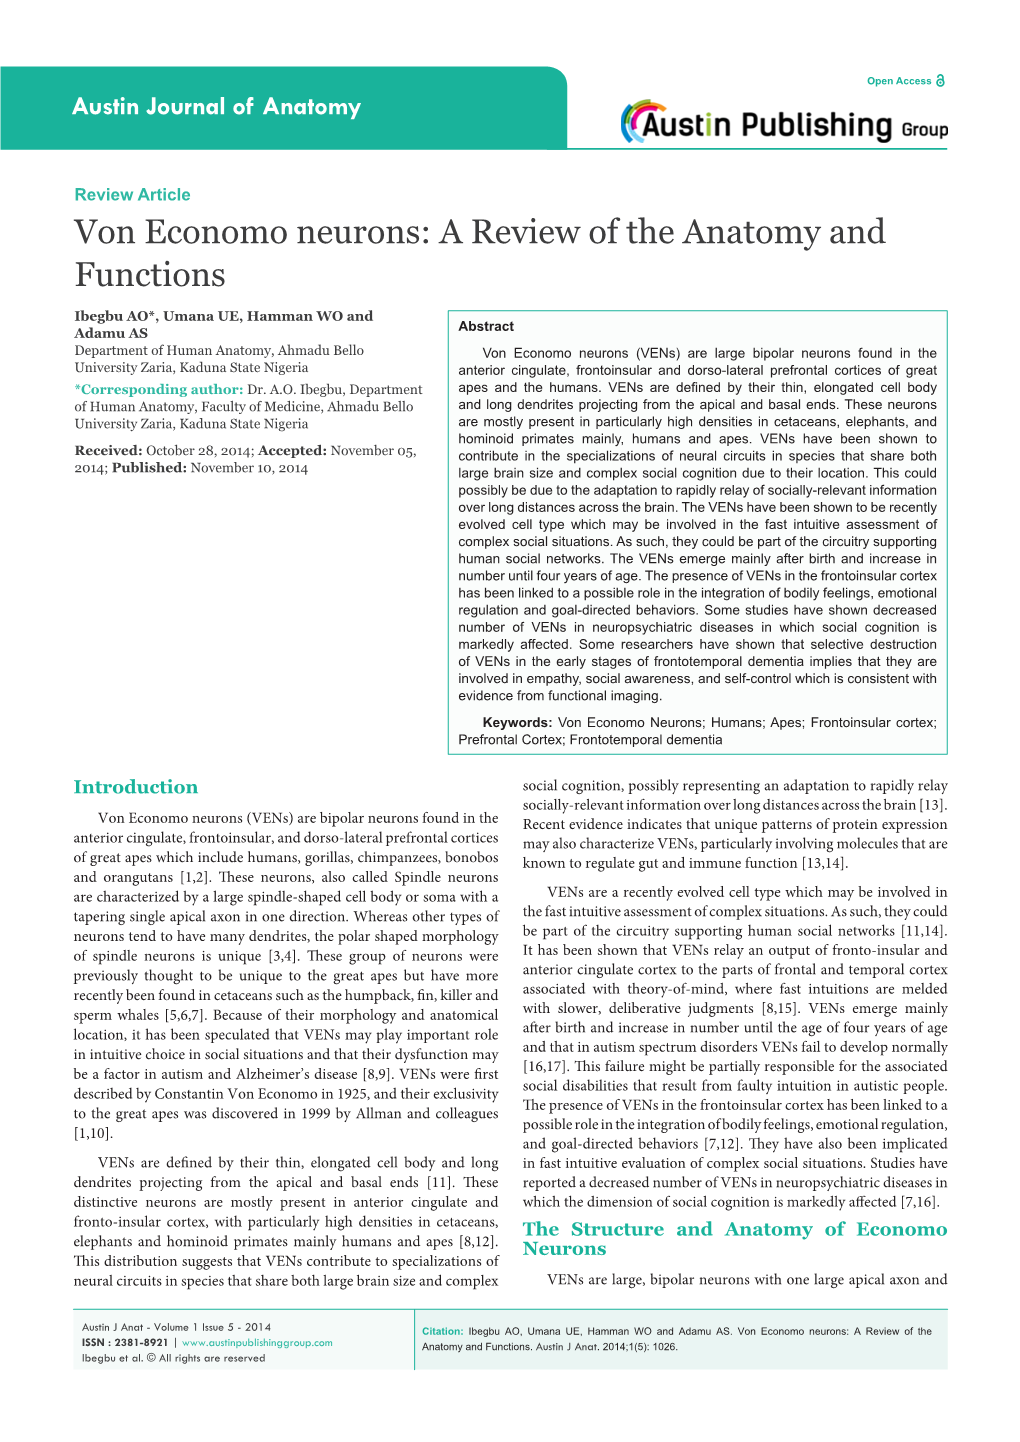 Von Economo Neurons: a Review of the Anatomy and Functions